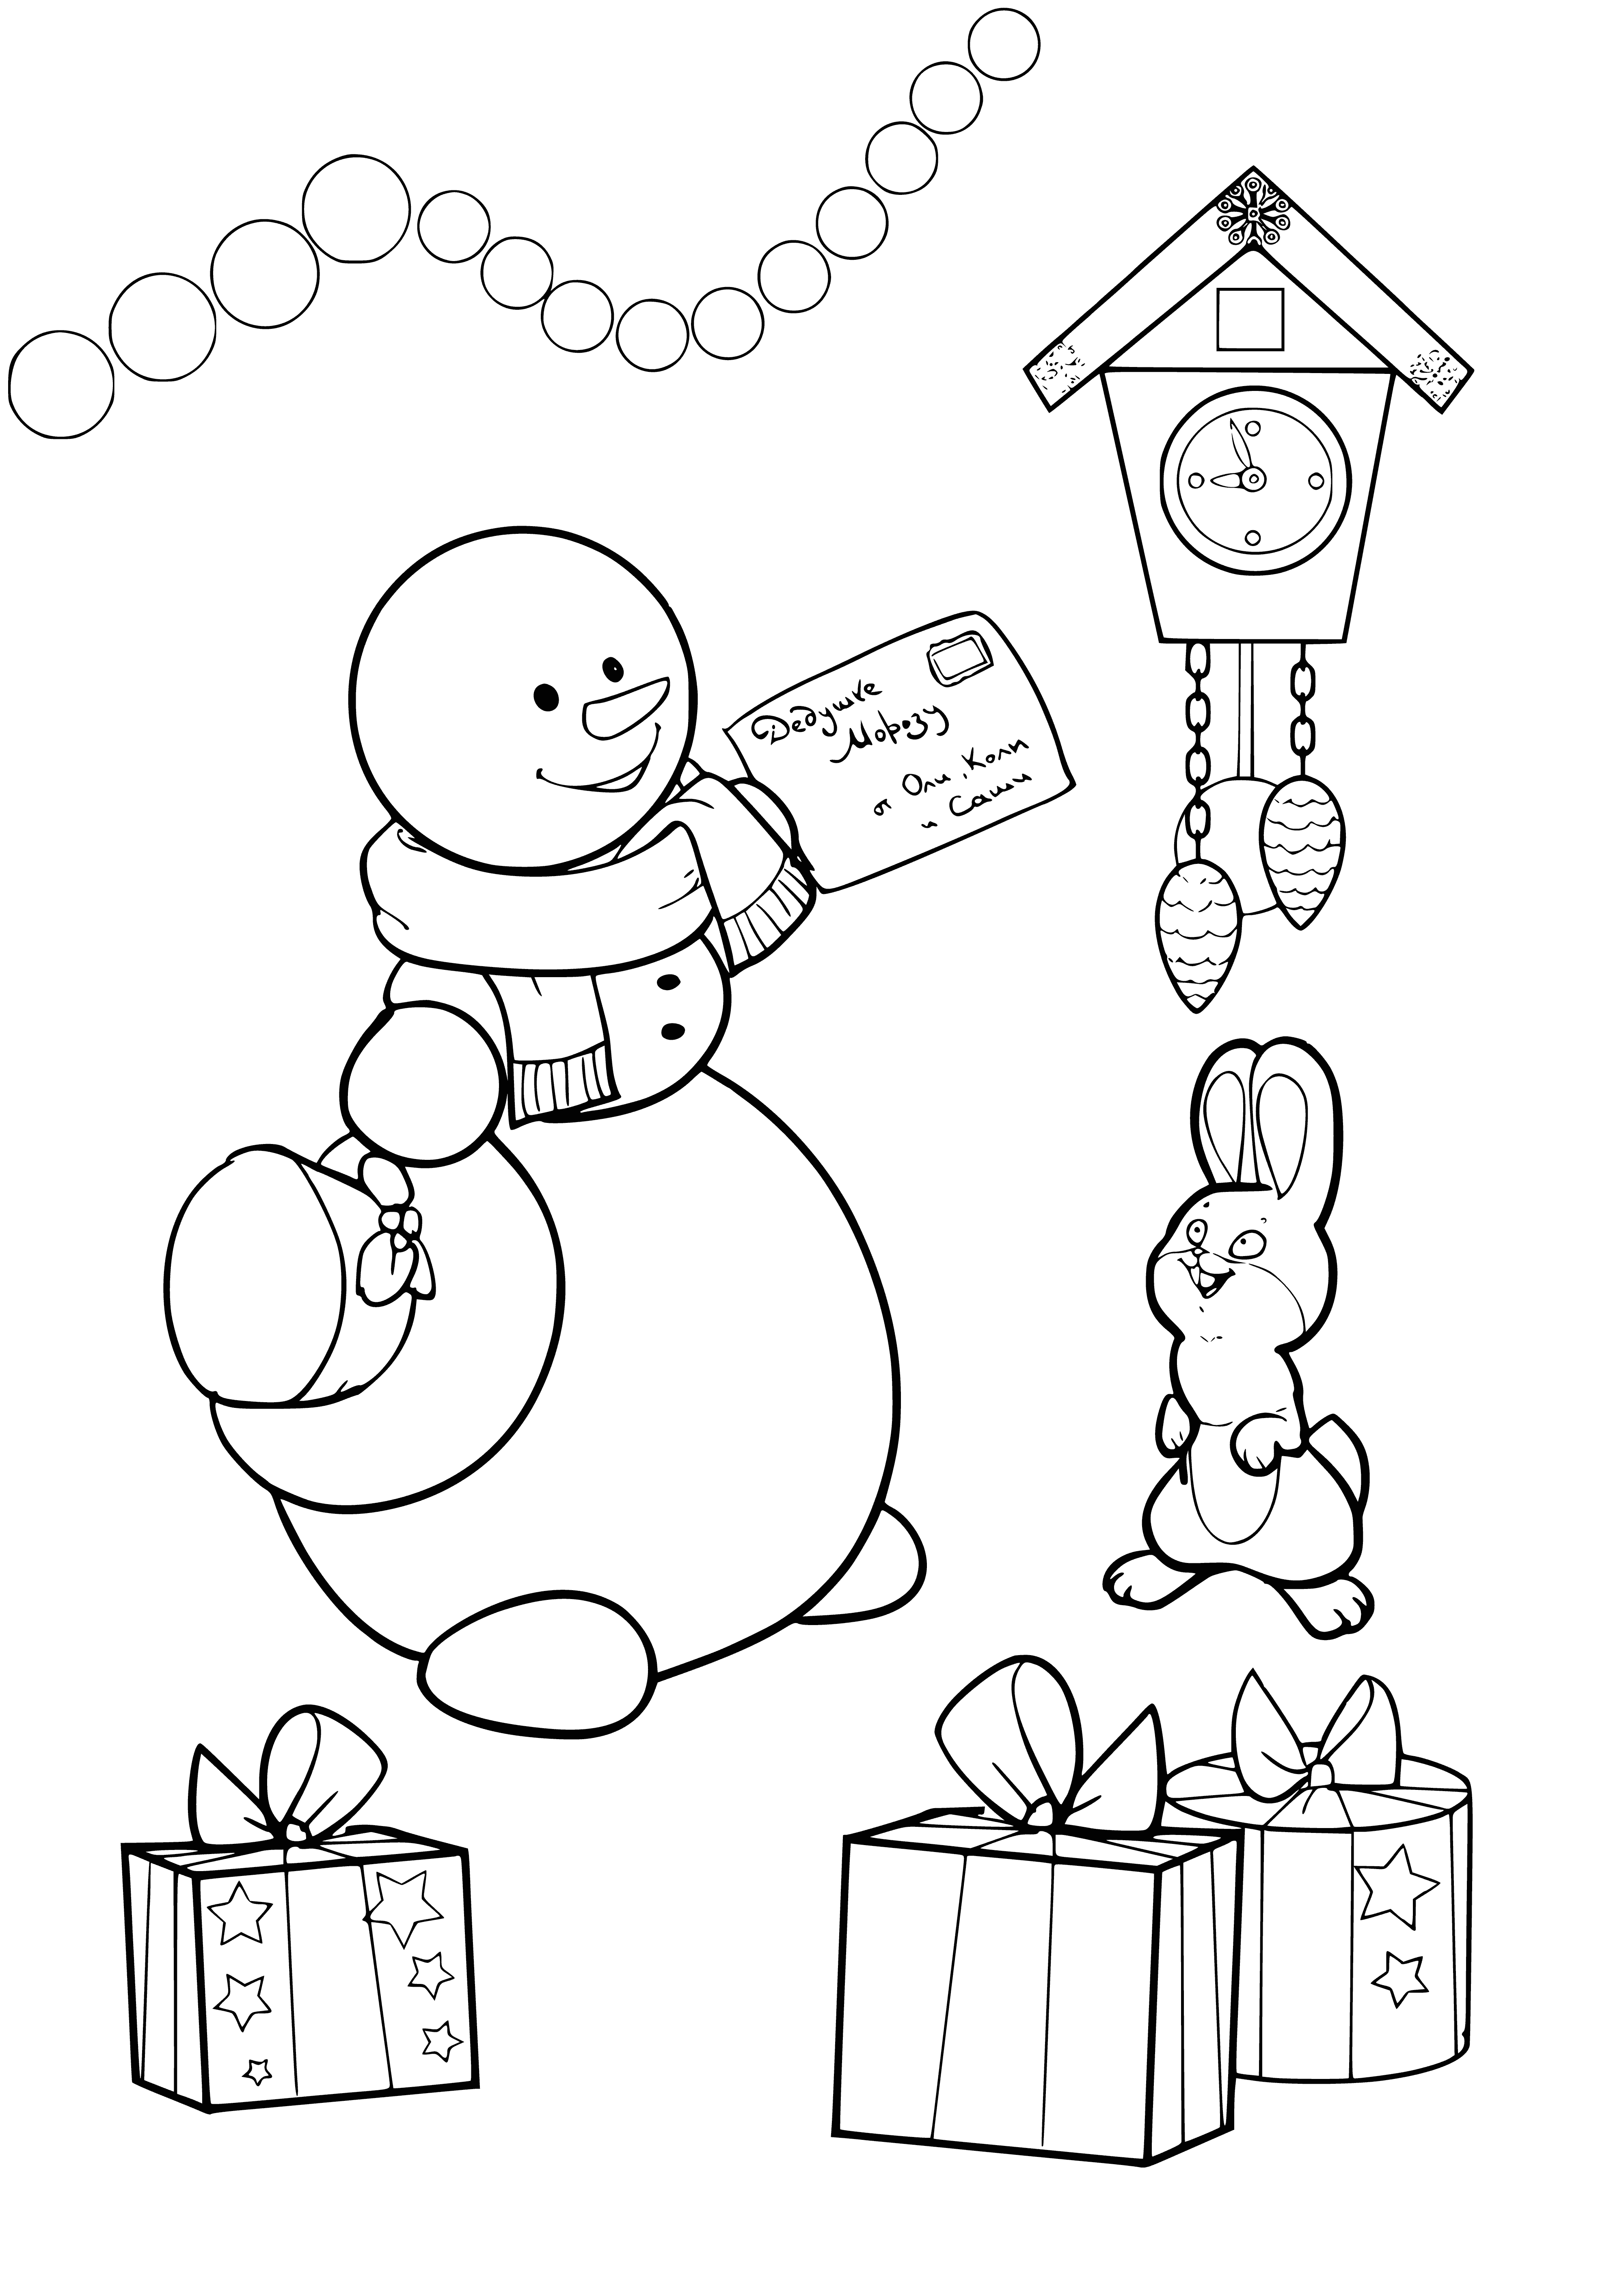 coloring page: Snowman holds letter addressed to Santa, with carrot nose and scarf.